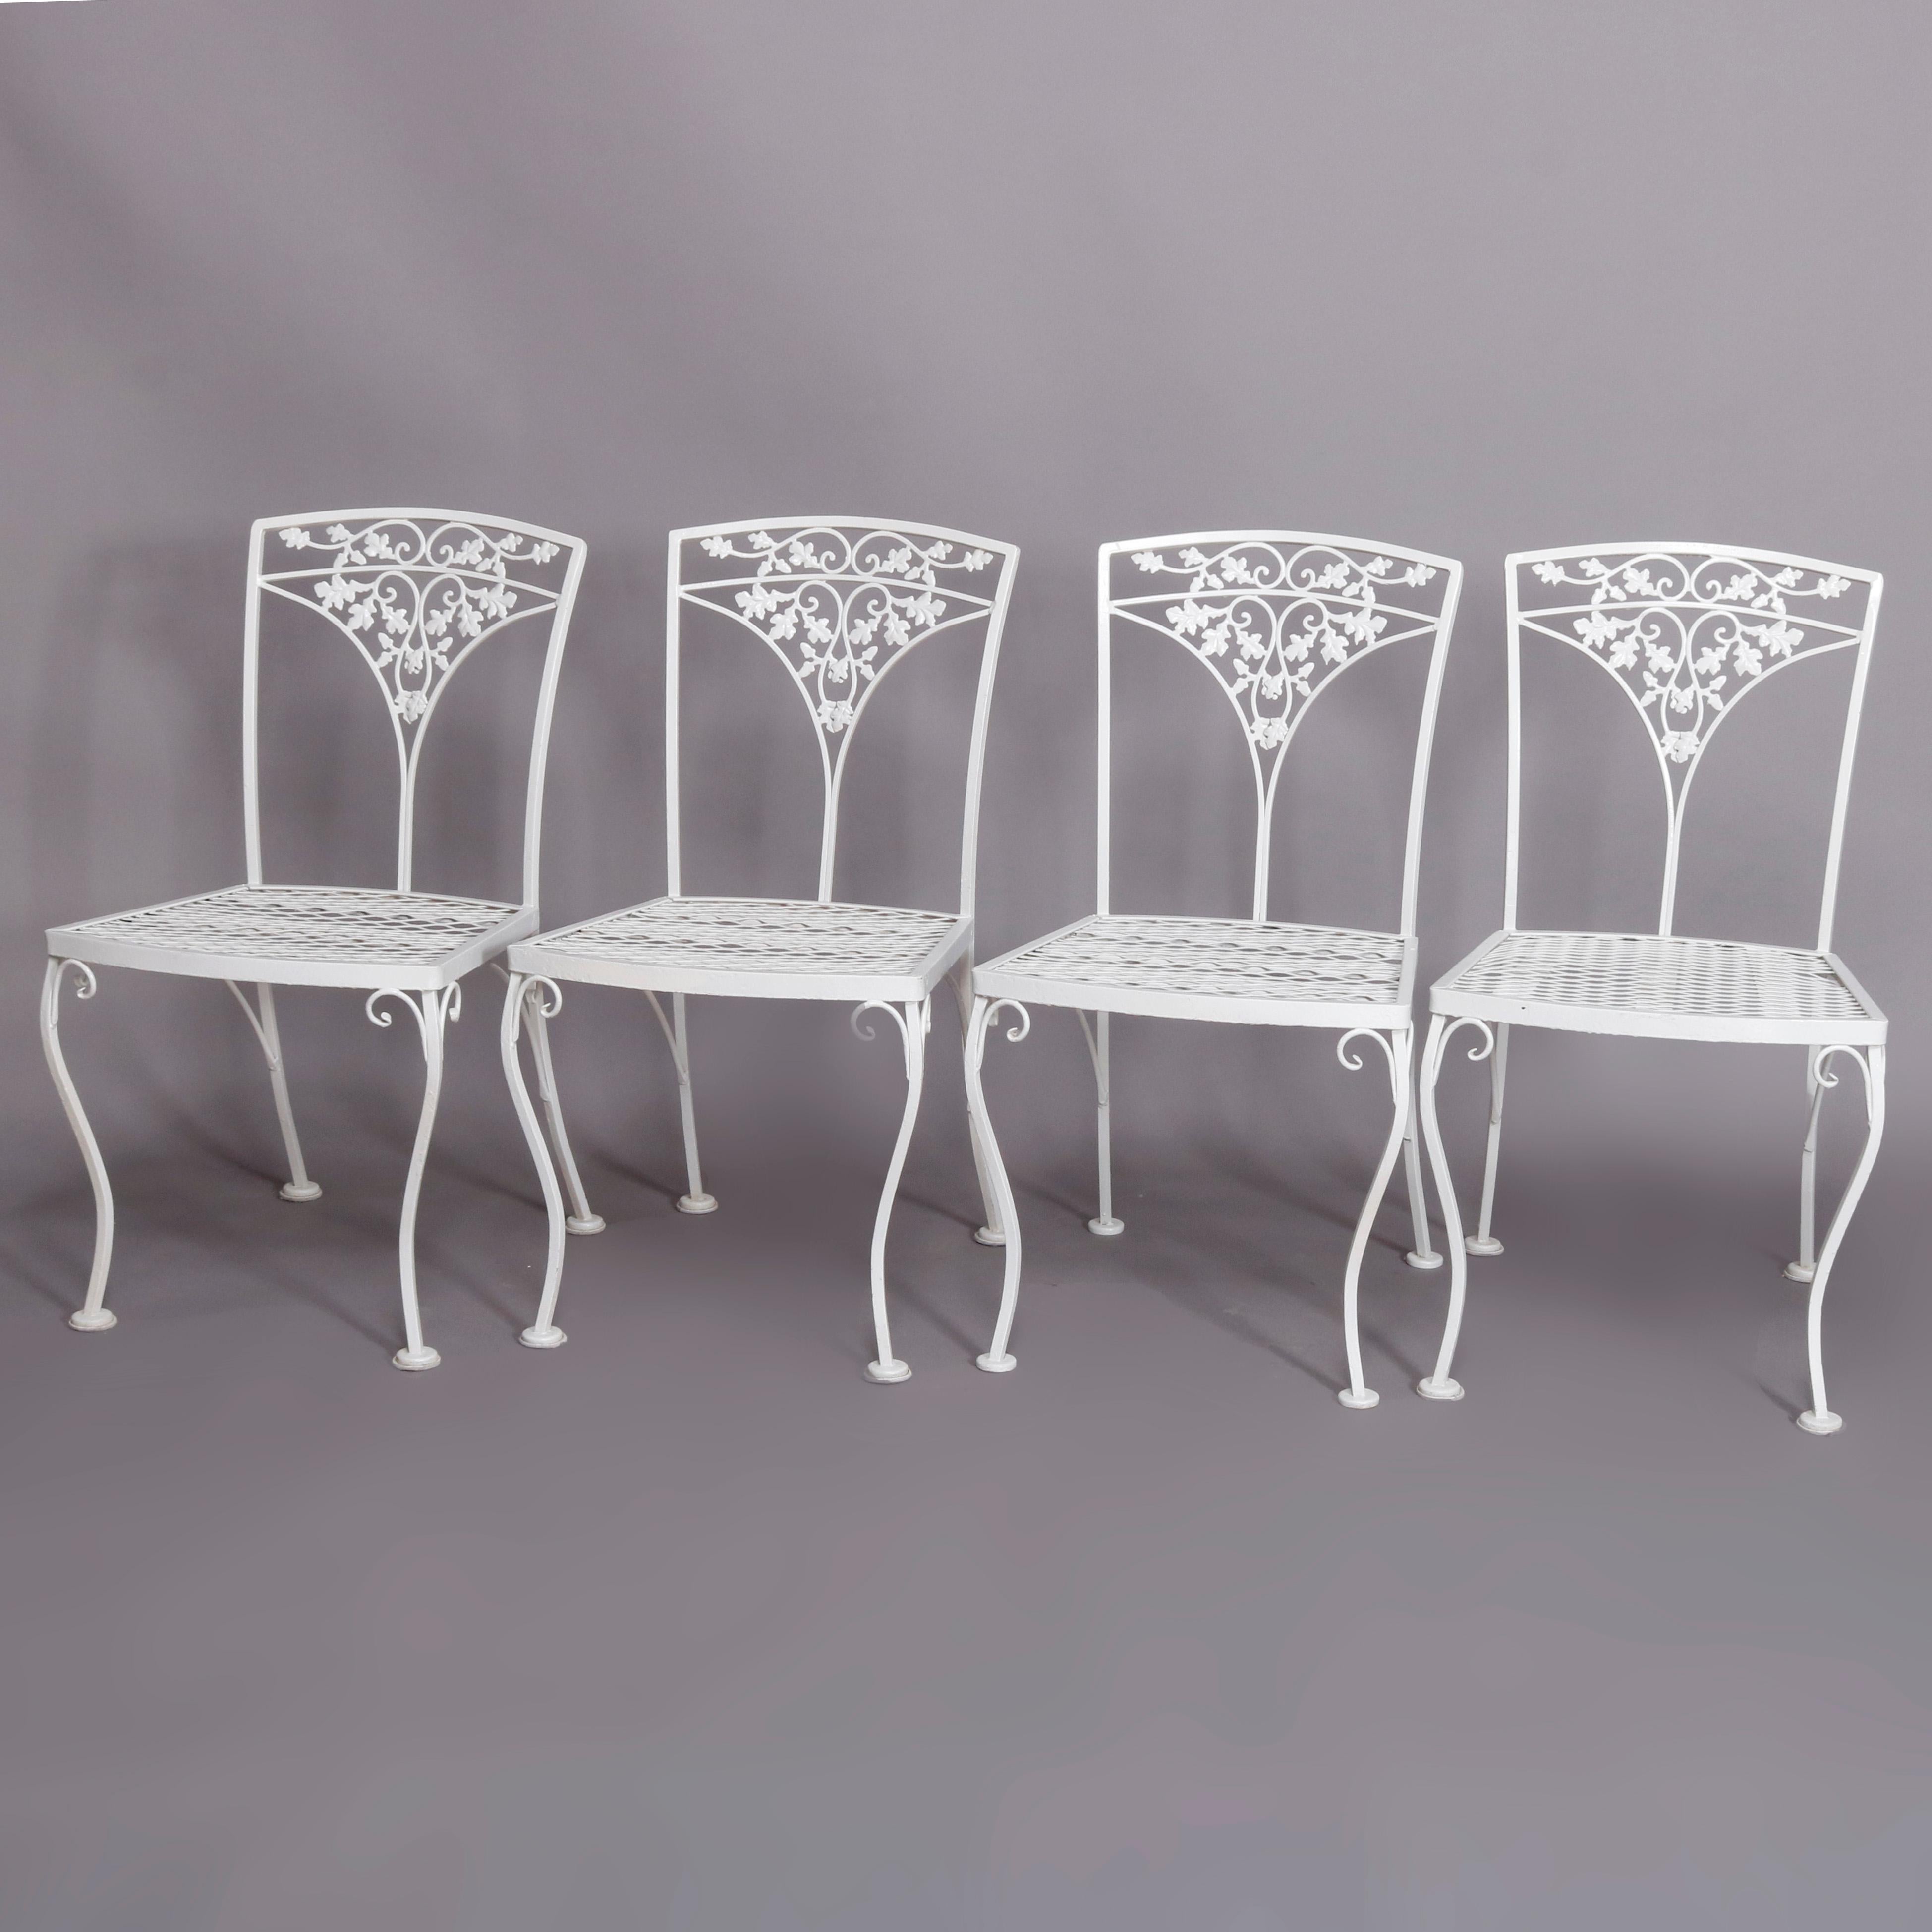 8 Victorian Style Wrought Iron Foliate Form White Painted Patio Chairs 2